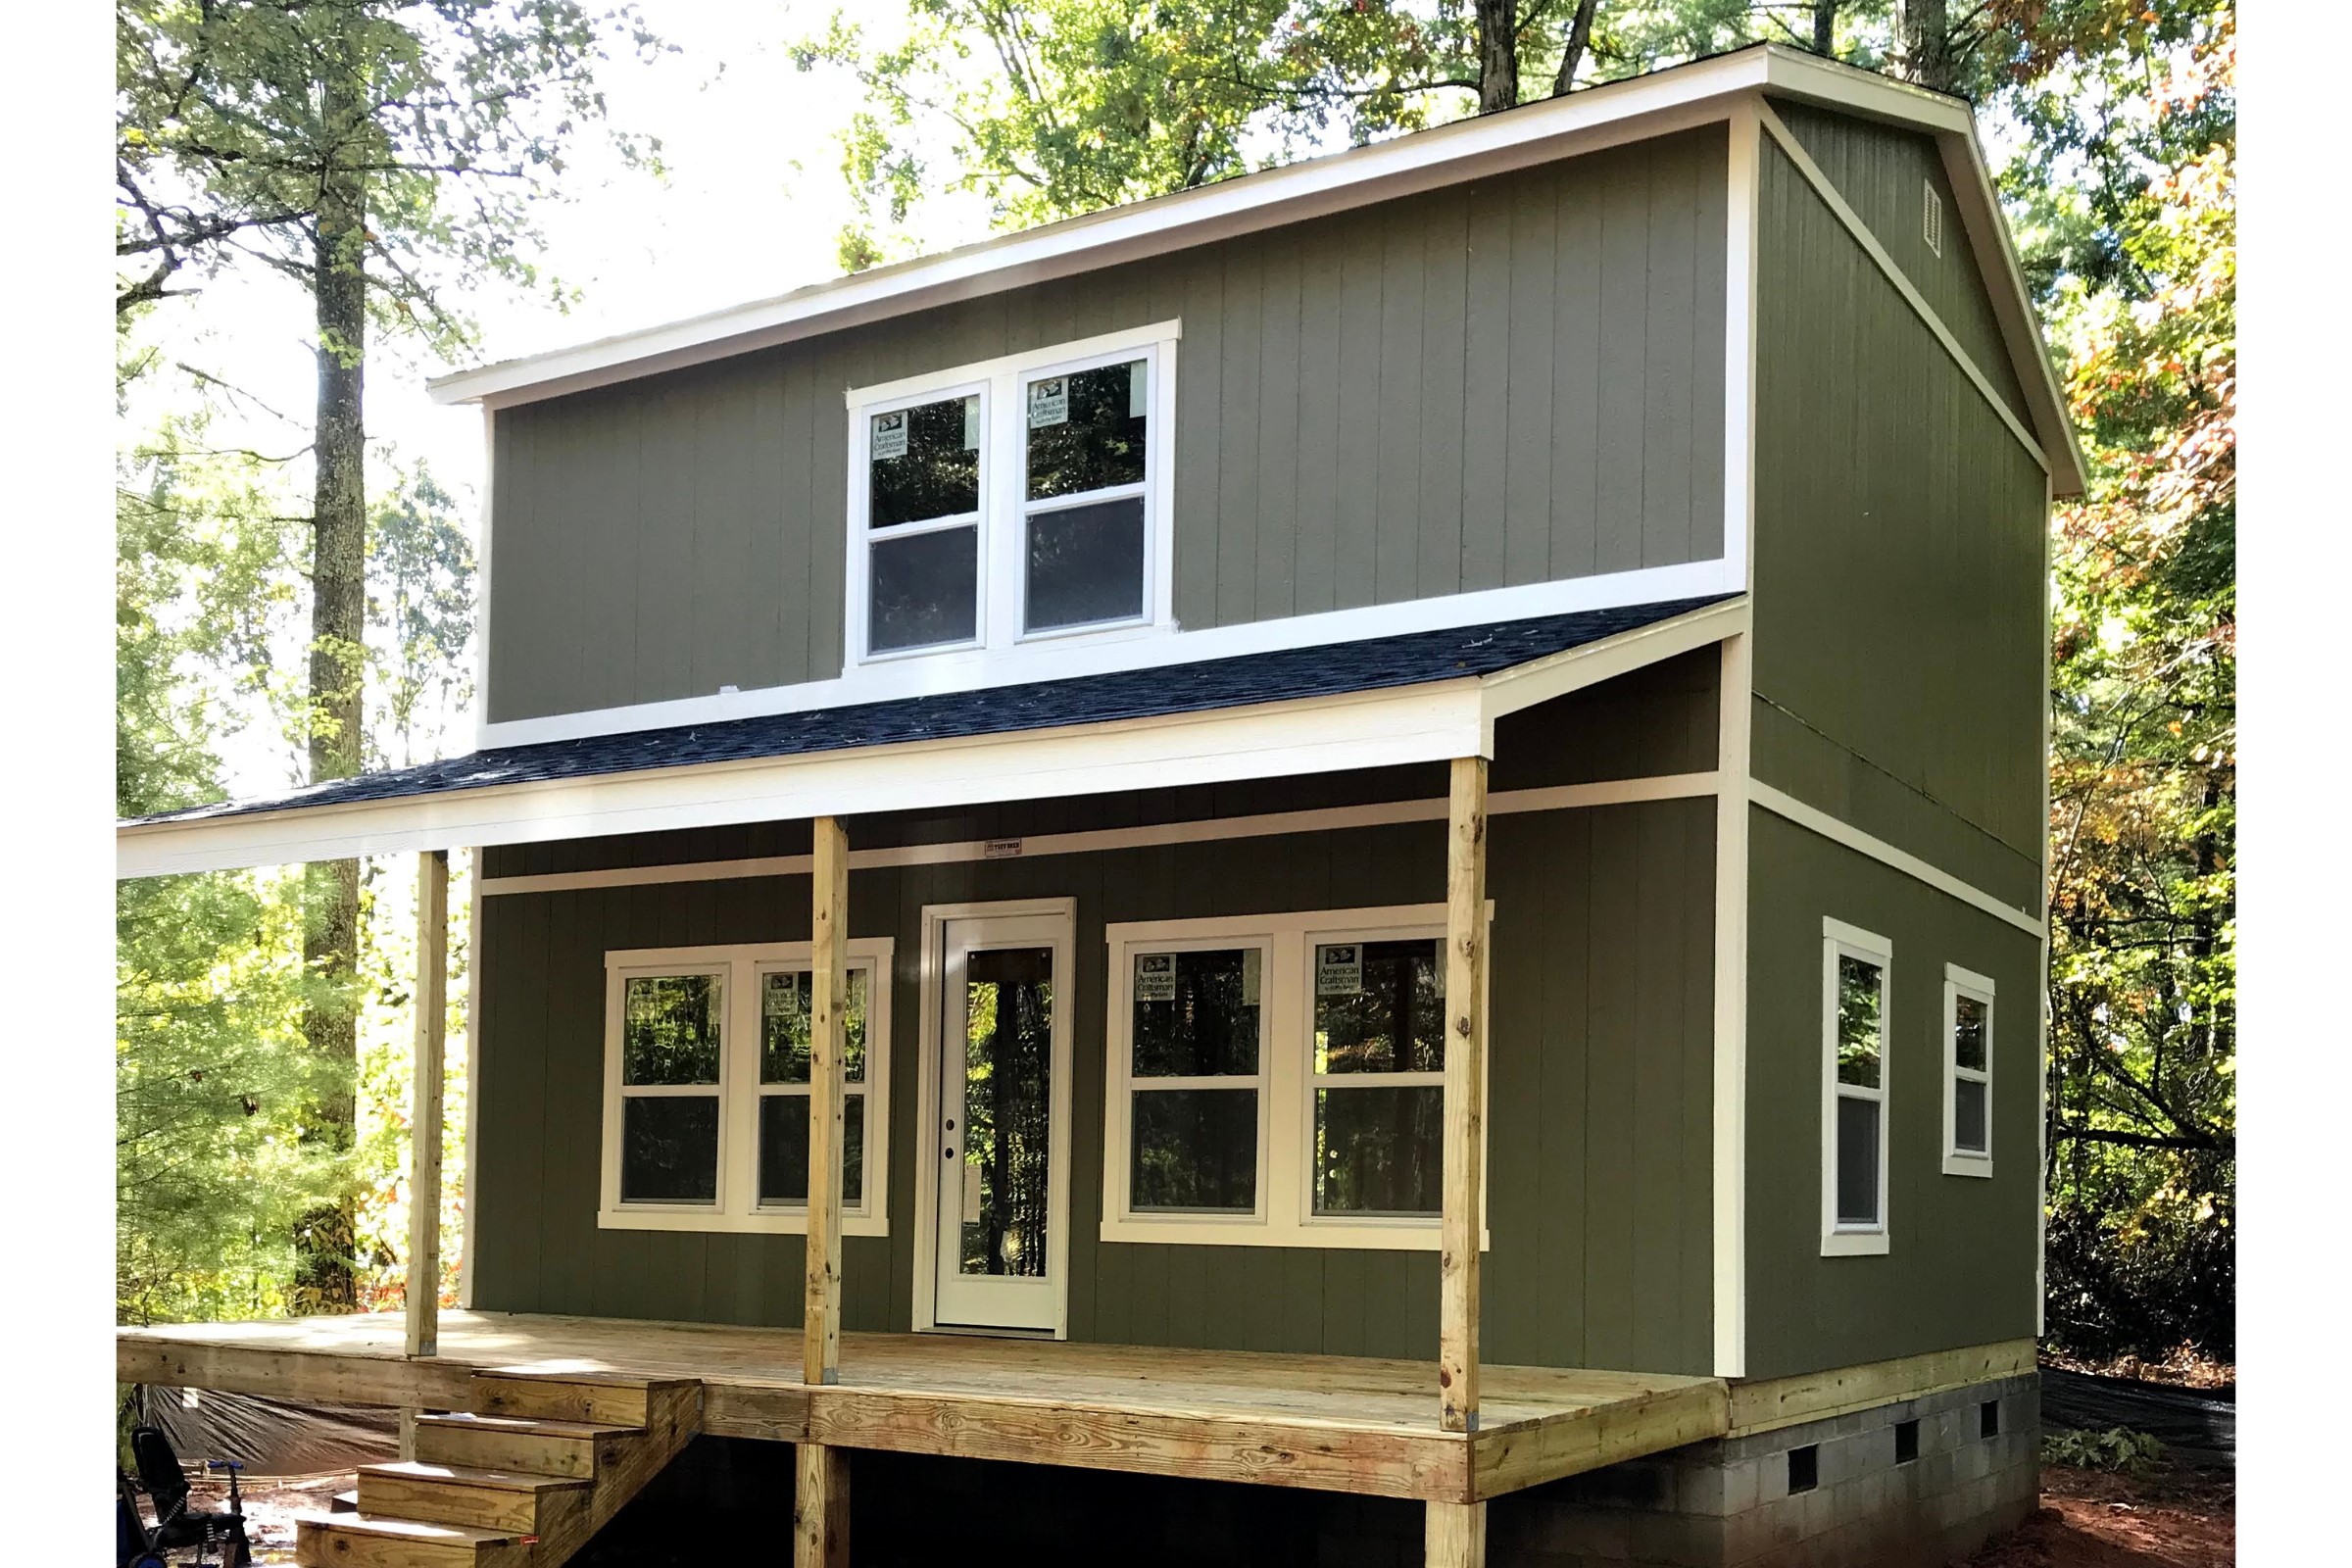 We Turned a Home Depot Shed Into a Tiny House and Sold it for $275,000'